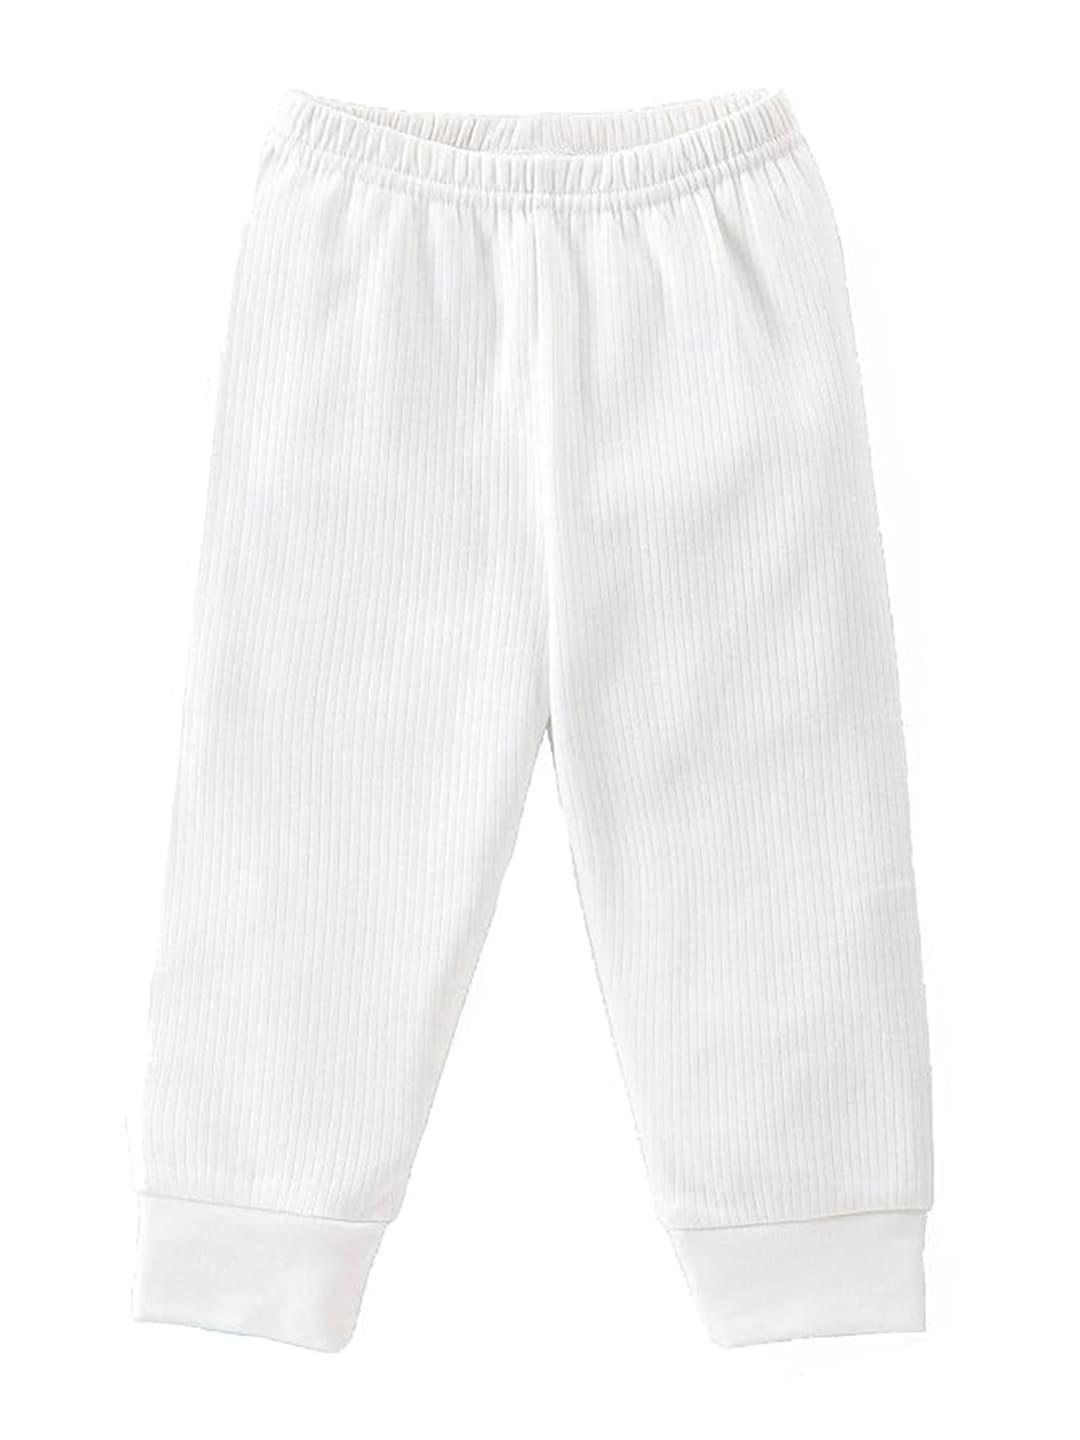 baesd-kids-cotton-thermal-bottoms